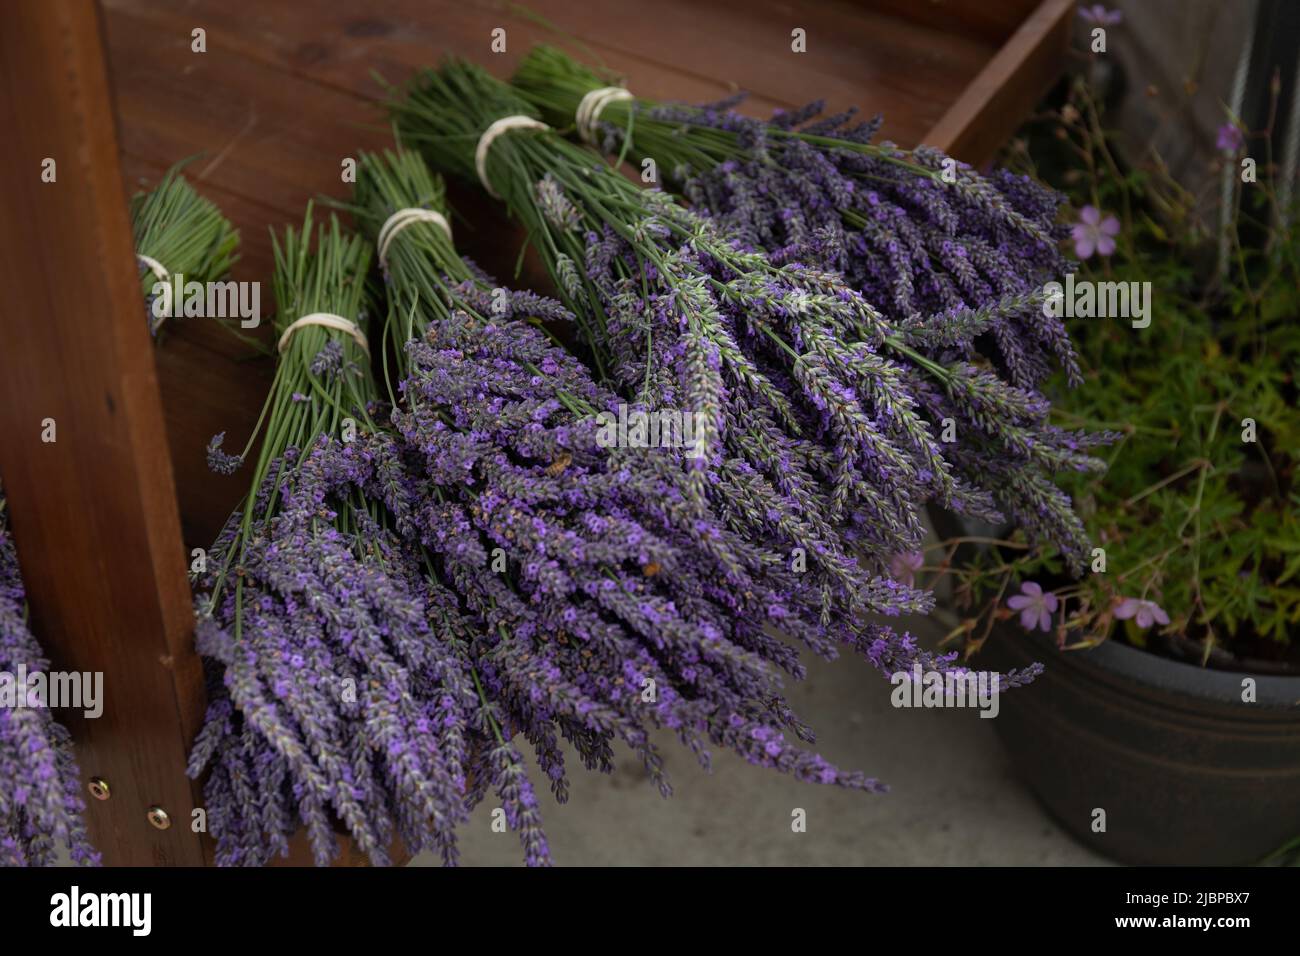 Bunches of Purple Lavender on Wood Shelf For Sale Stock Photo